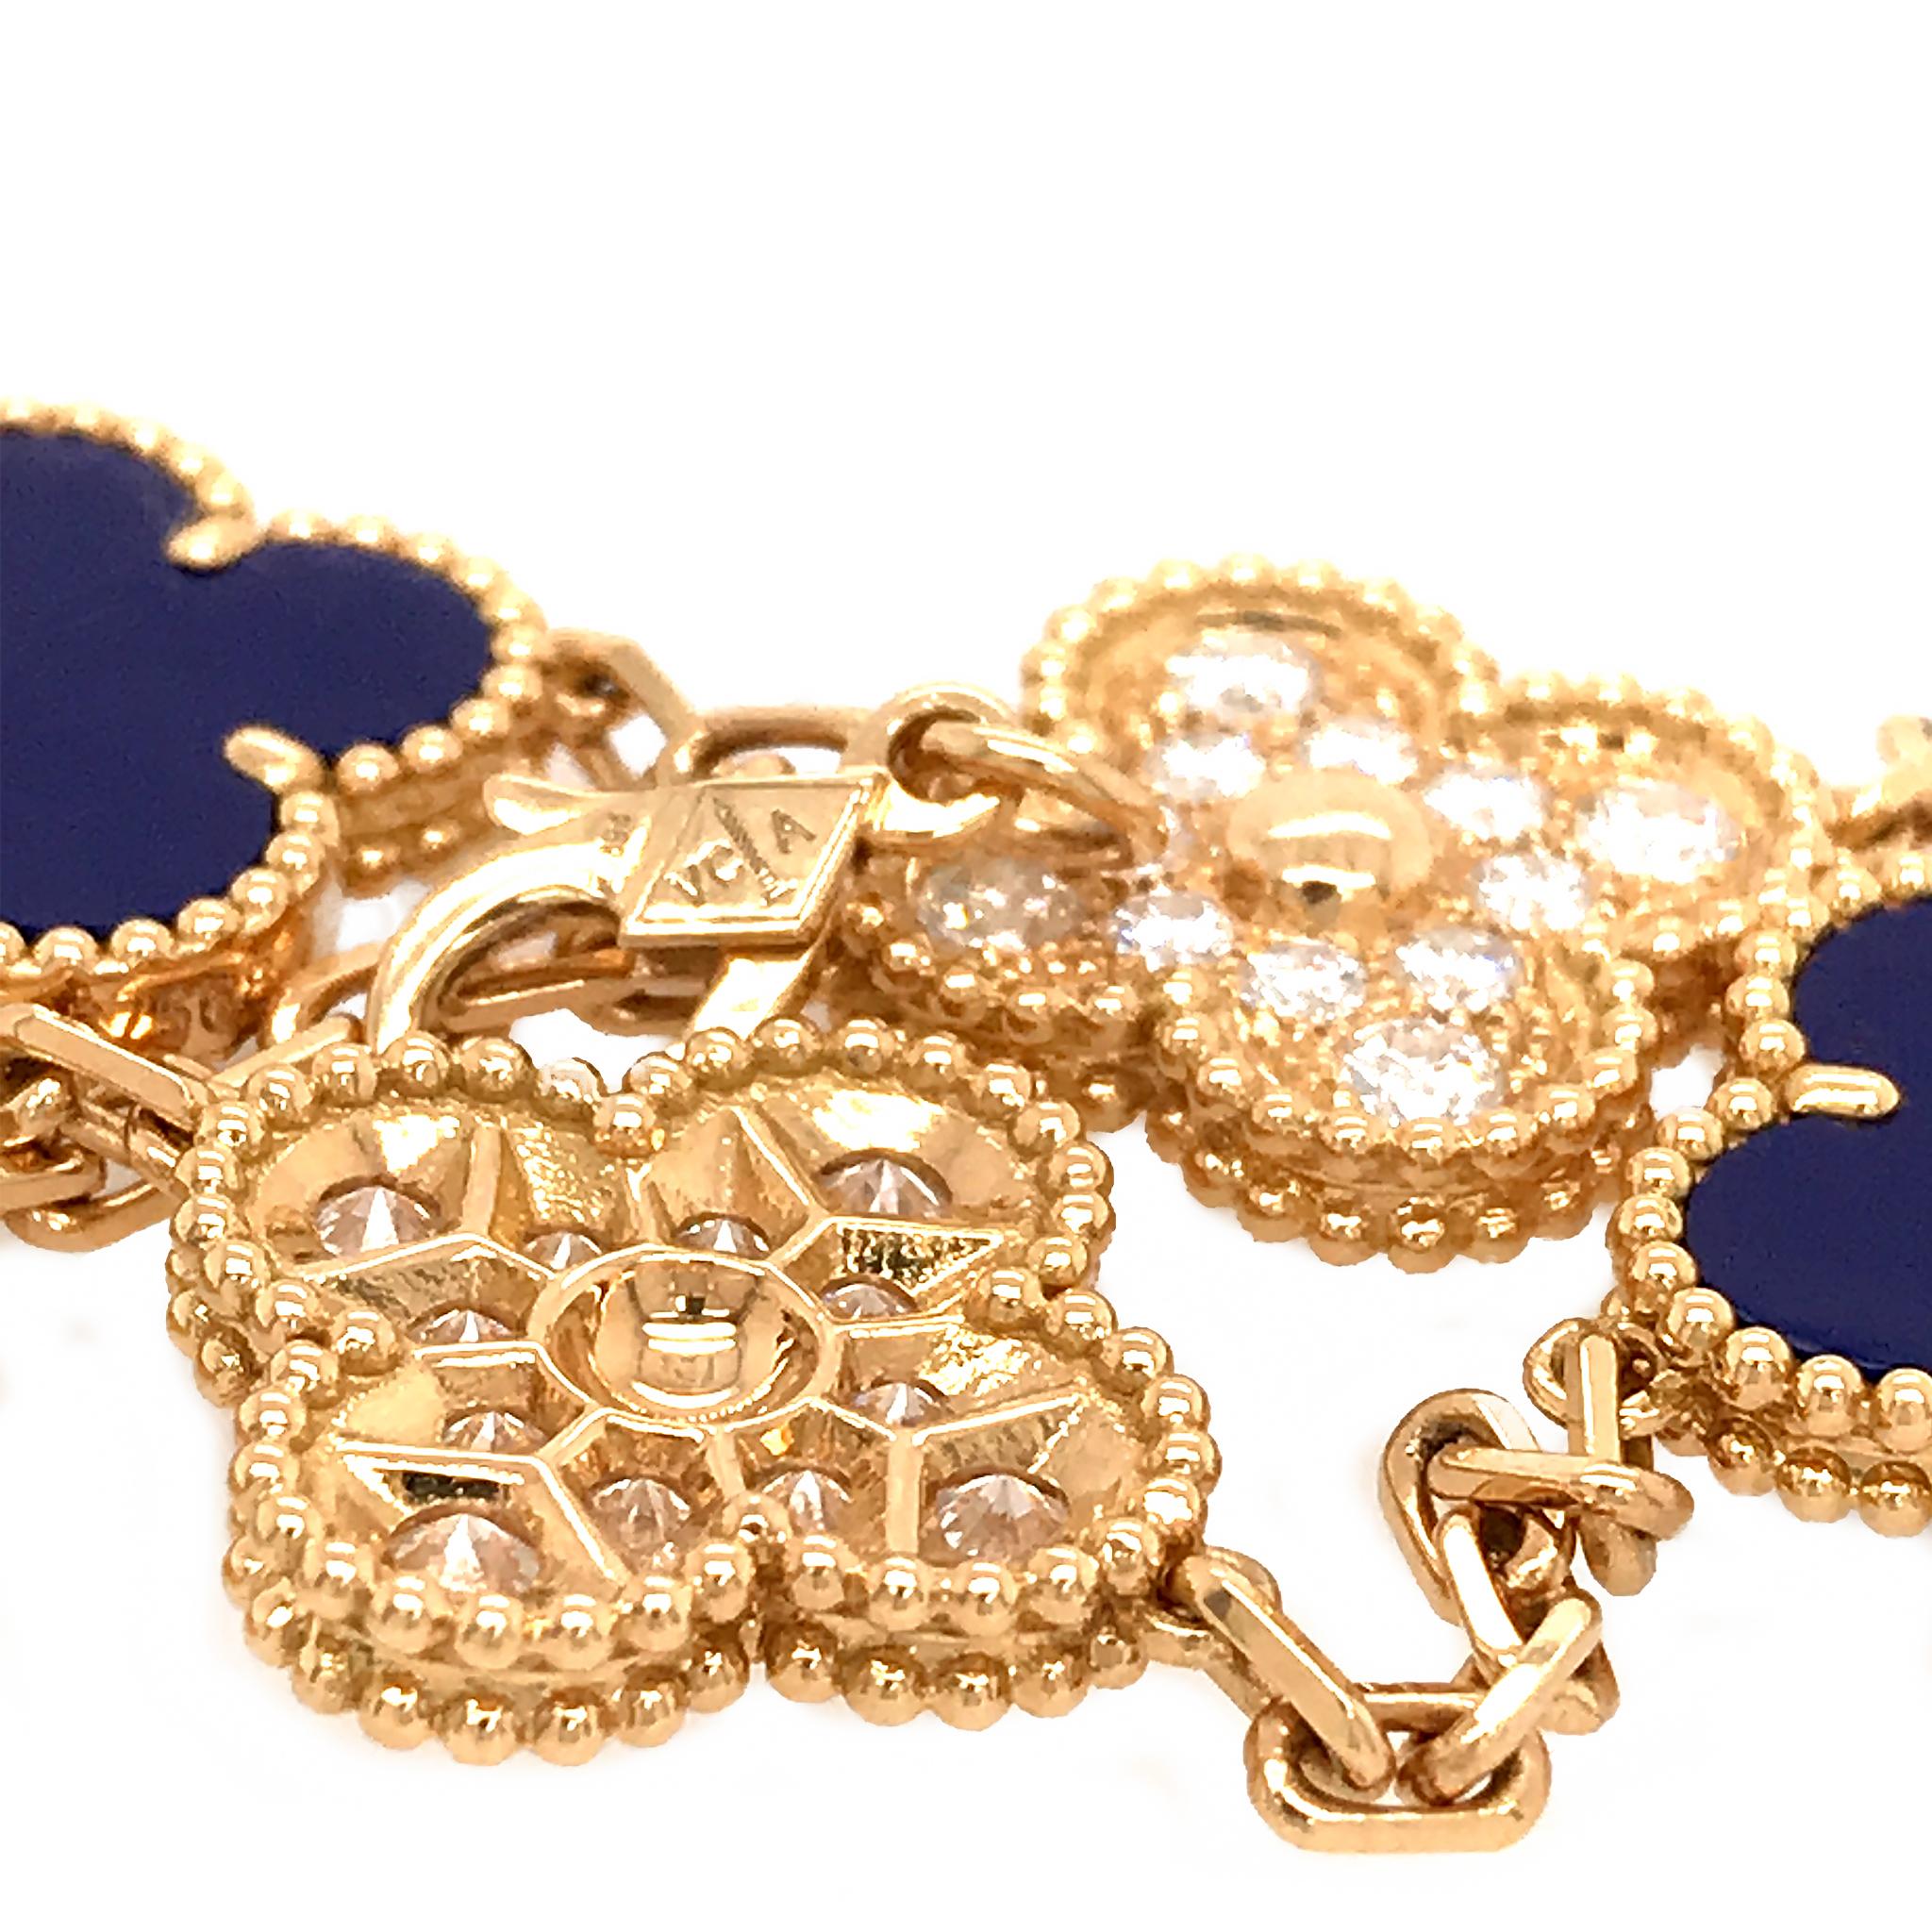 For the 50th anniversary, Van Cleef & Arpels released a small, limited collection of pieces, one of which was the 5 motif bracelet in lapis lazuli and diamonds. The gorgeous lapis stone hasn’t been seen in the Alhambra collection since Jacques